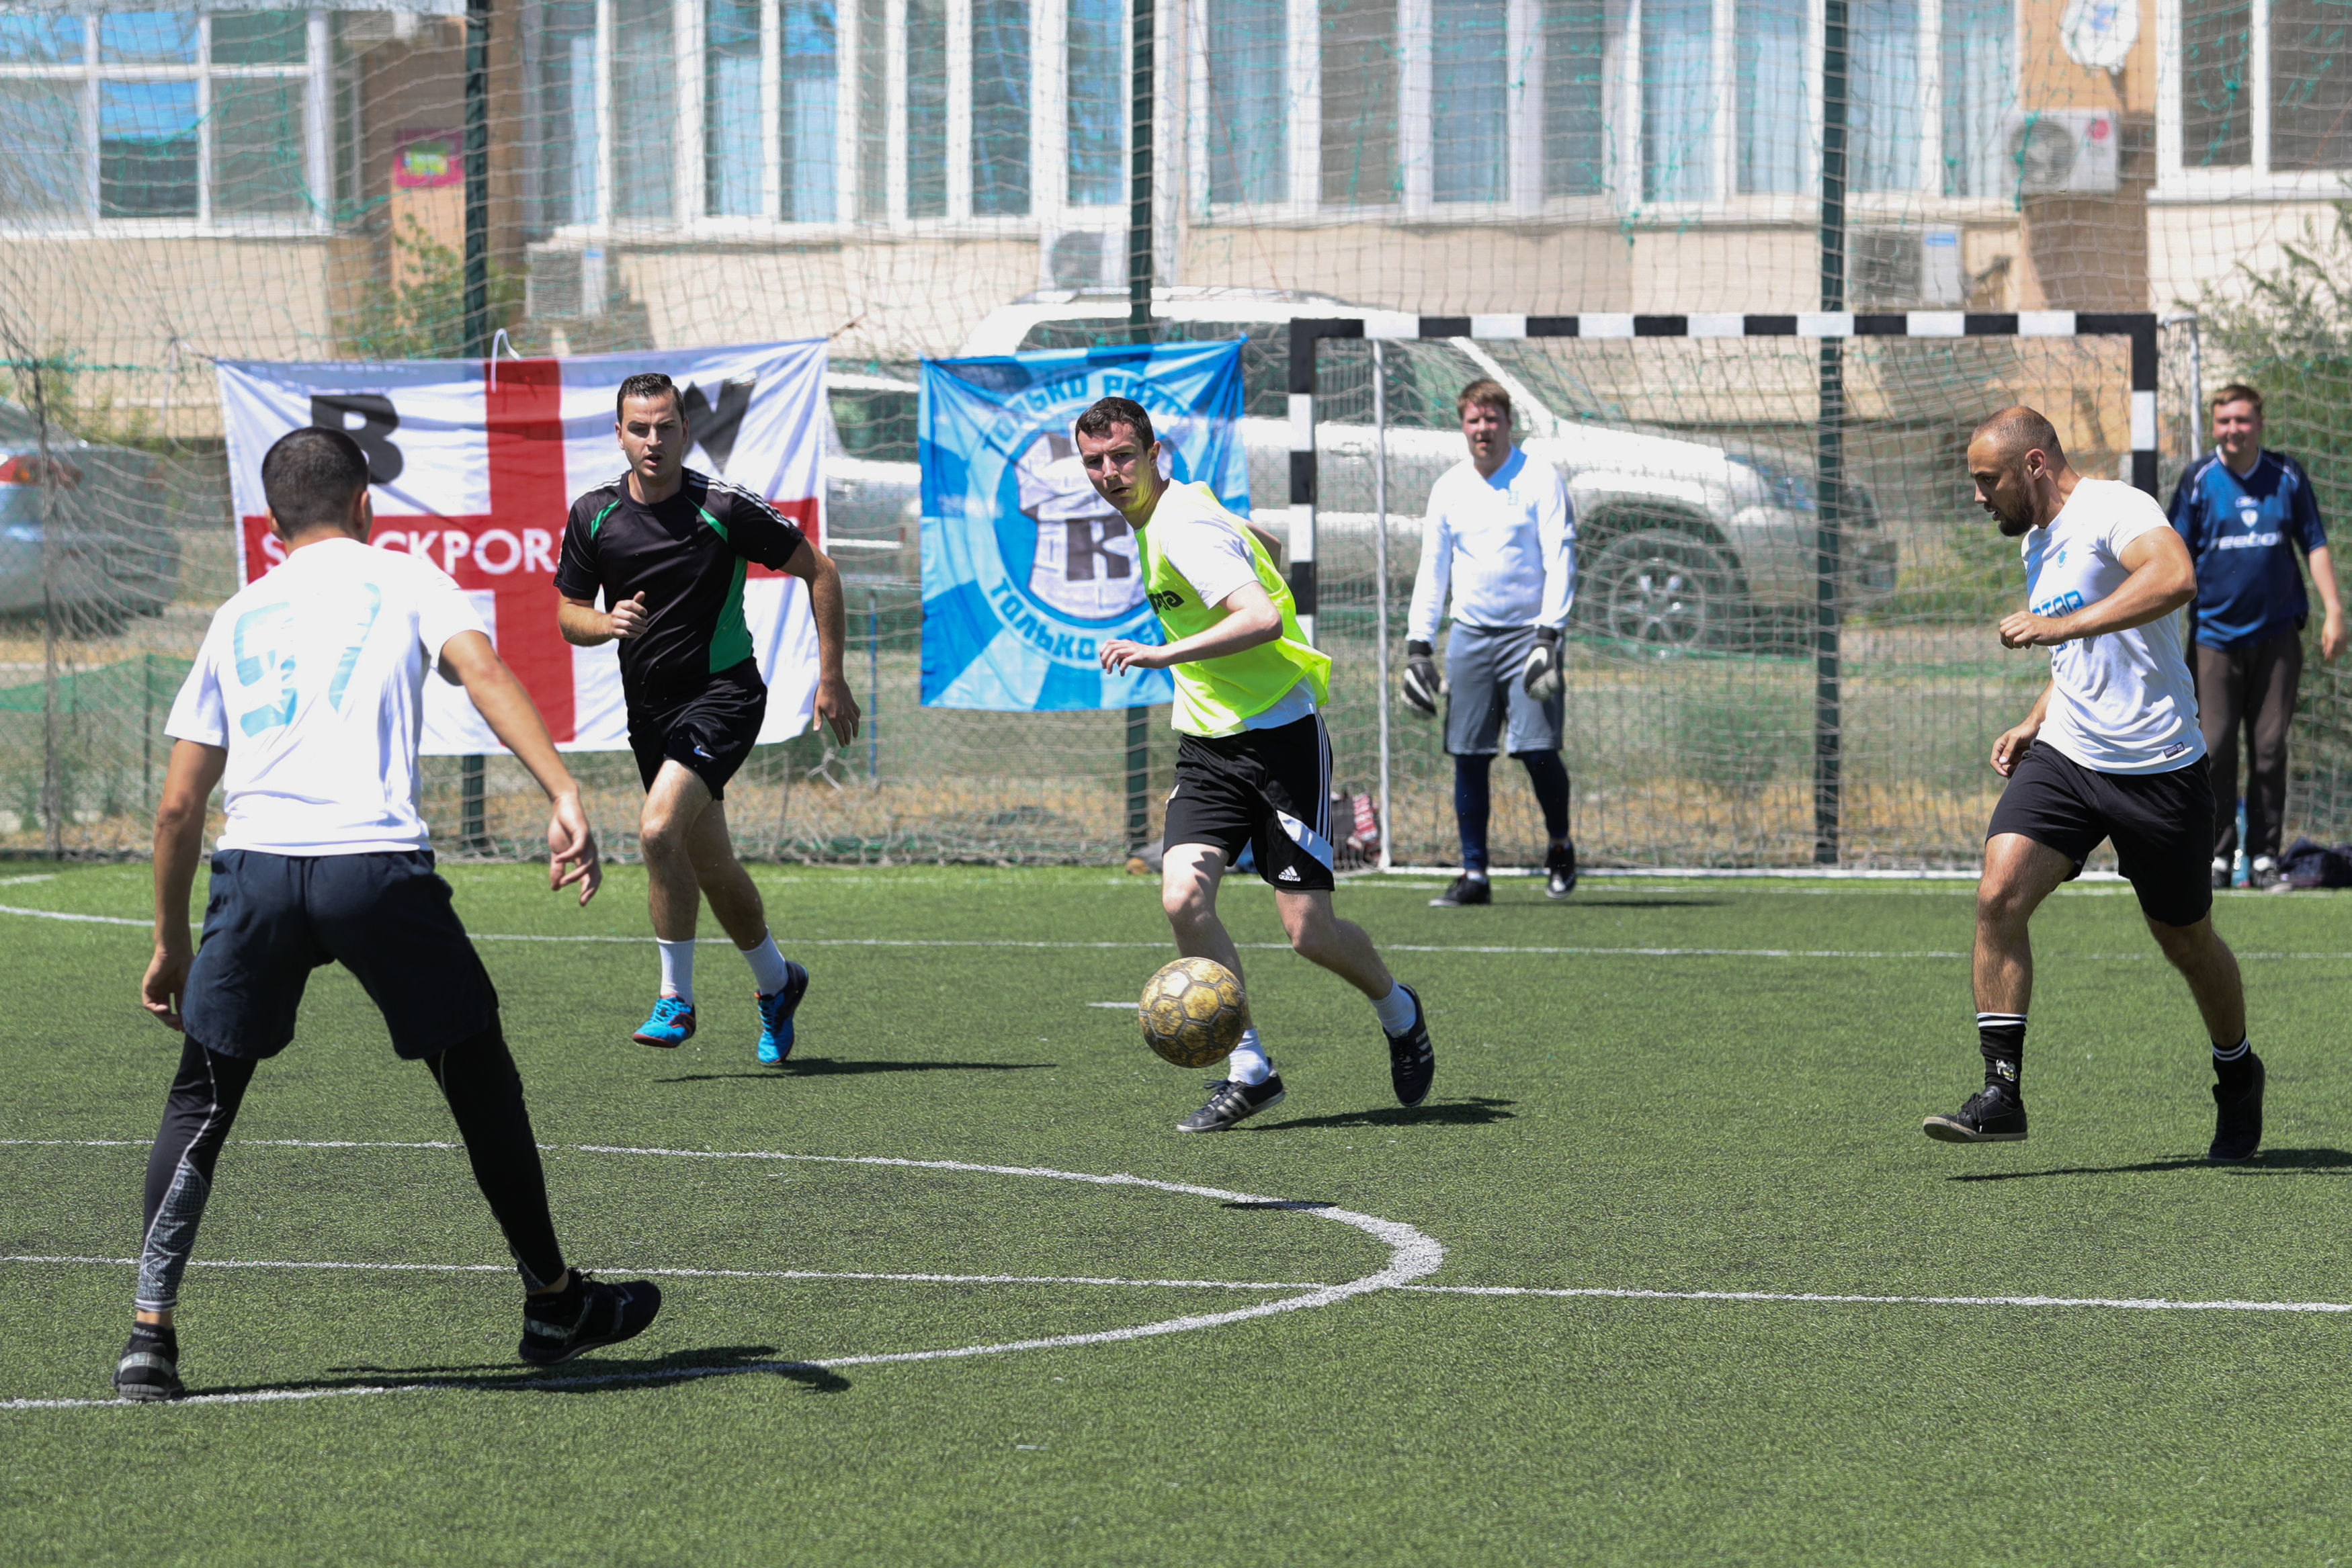 English football fans play against FC Rota Volgograd supporters in a five-a-side football match